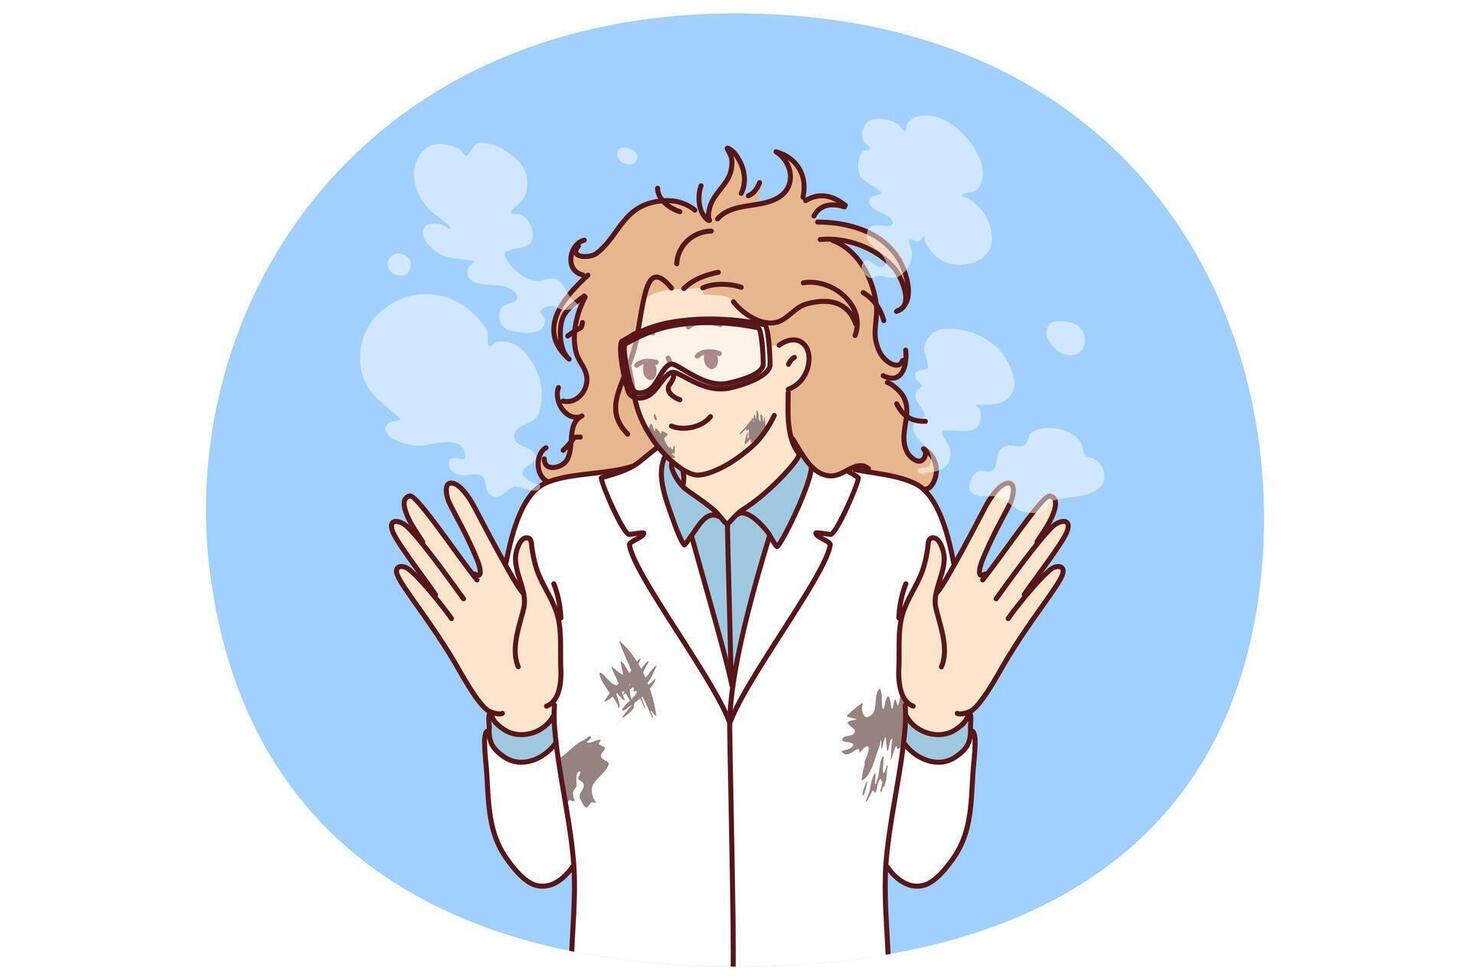 Woman mad scientist with tousled hair after failed experiment with chemical reagents. Vector image